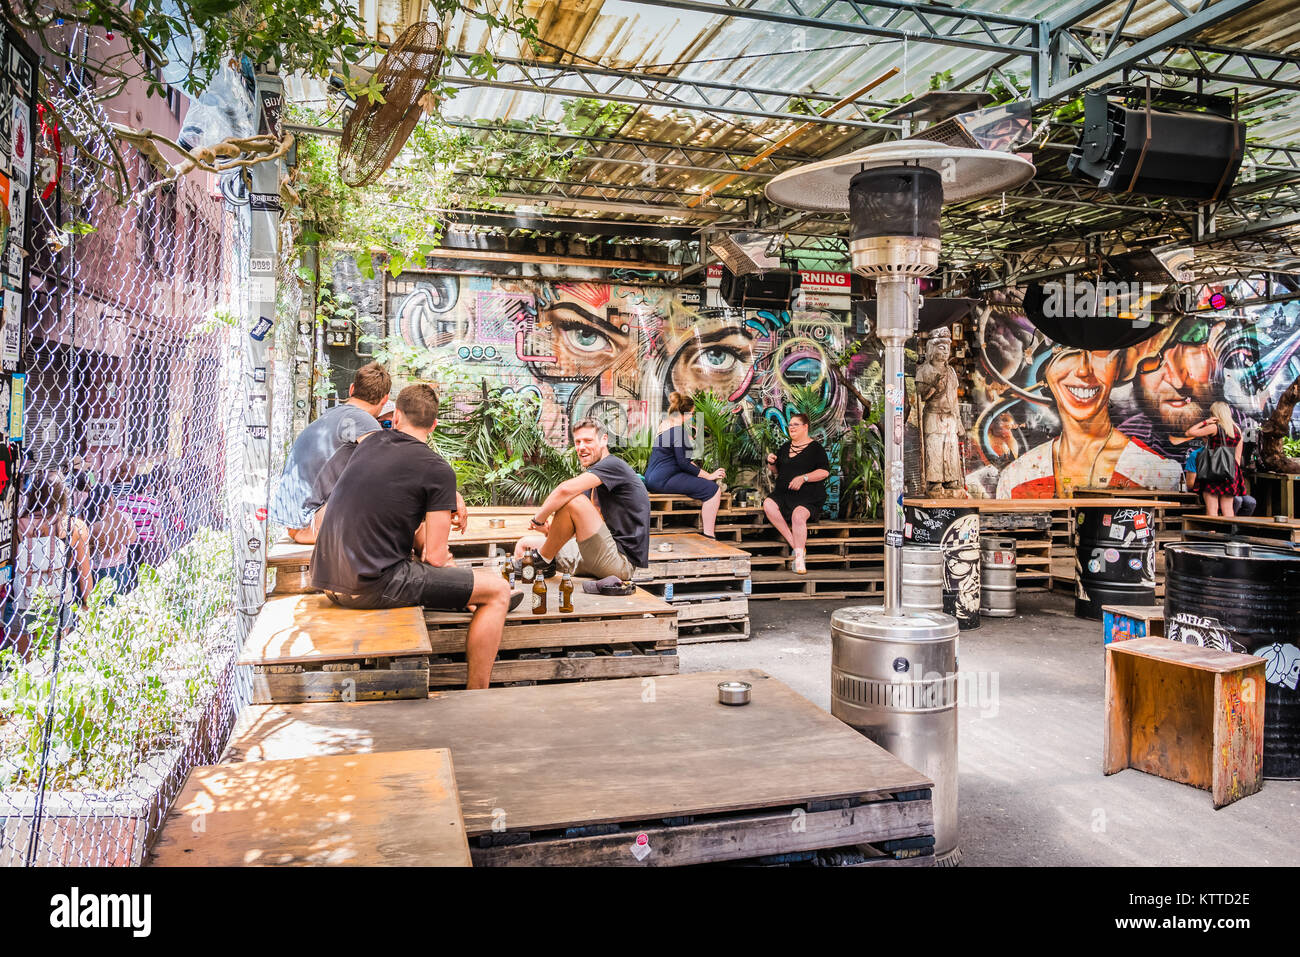 melbourne outdoor cafes Stock Photo